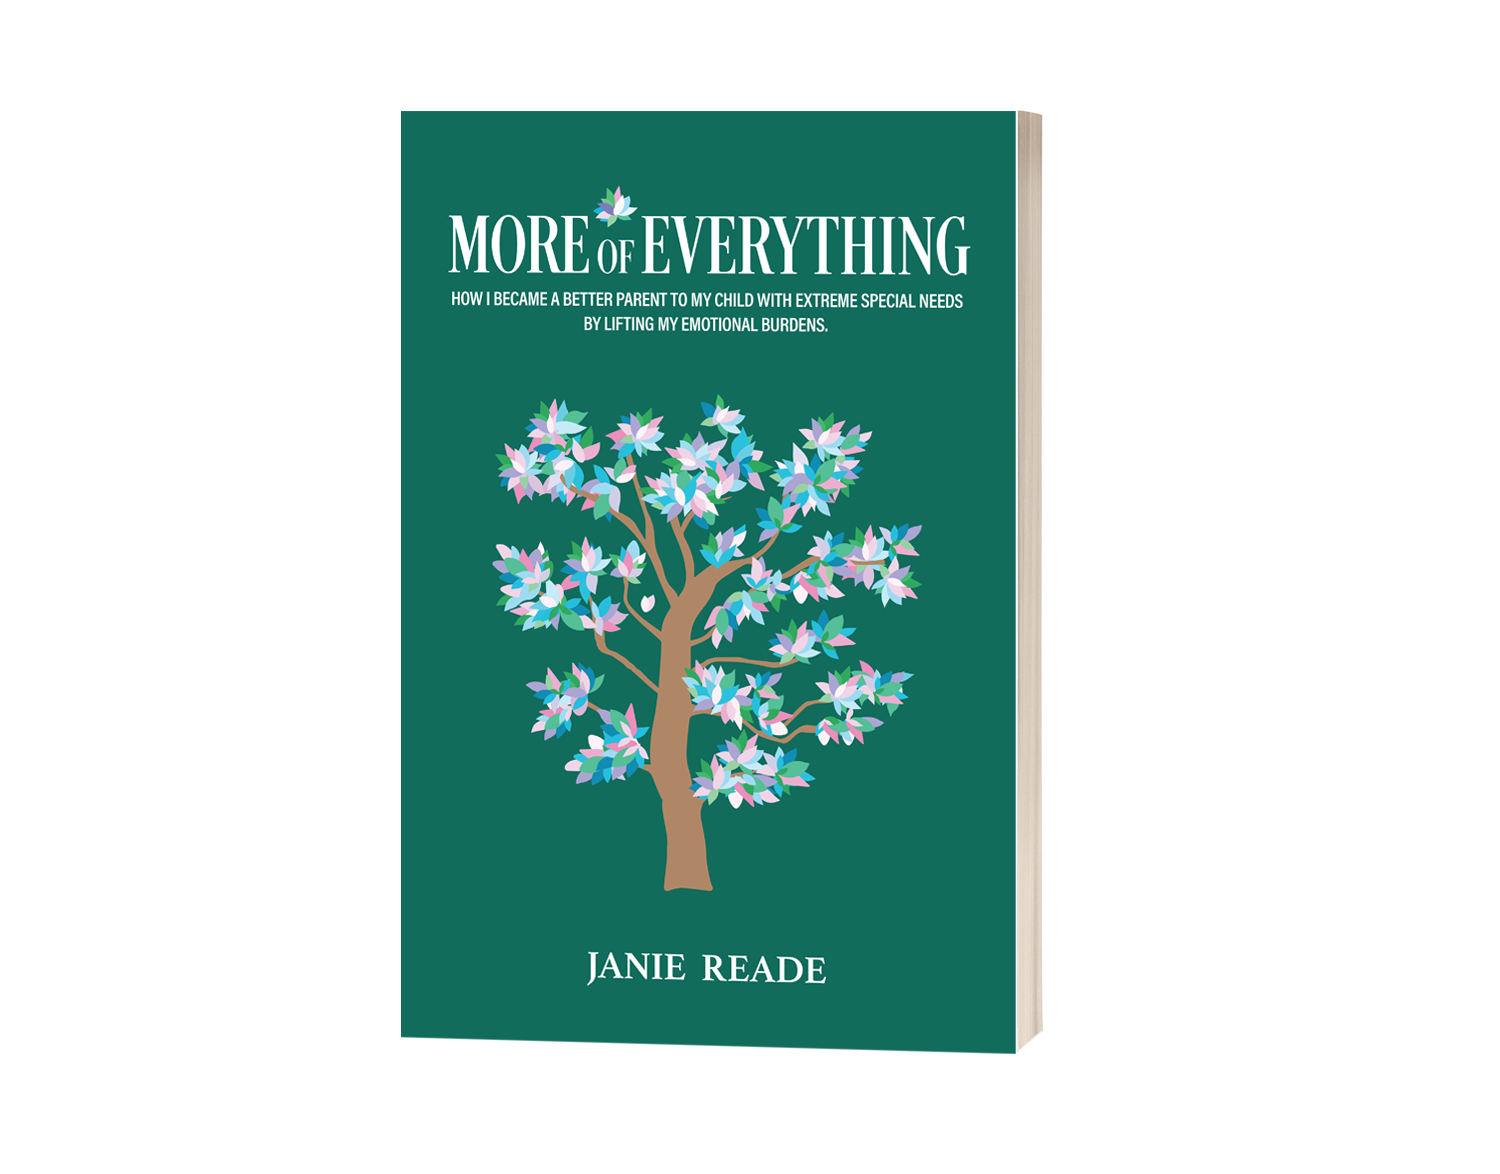 More of Everything by Janie Reade paperback book cover by Gyoung Soon Choi and Rhianon Page